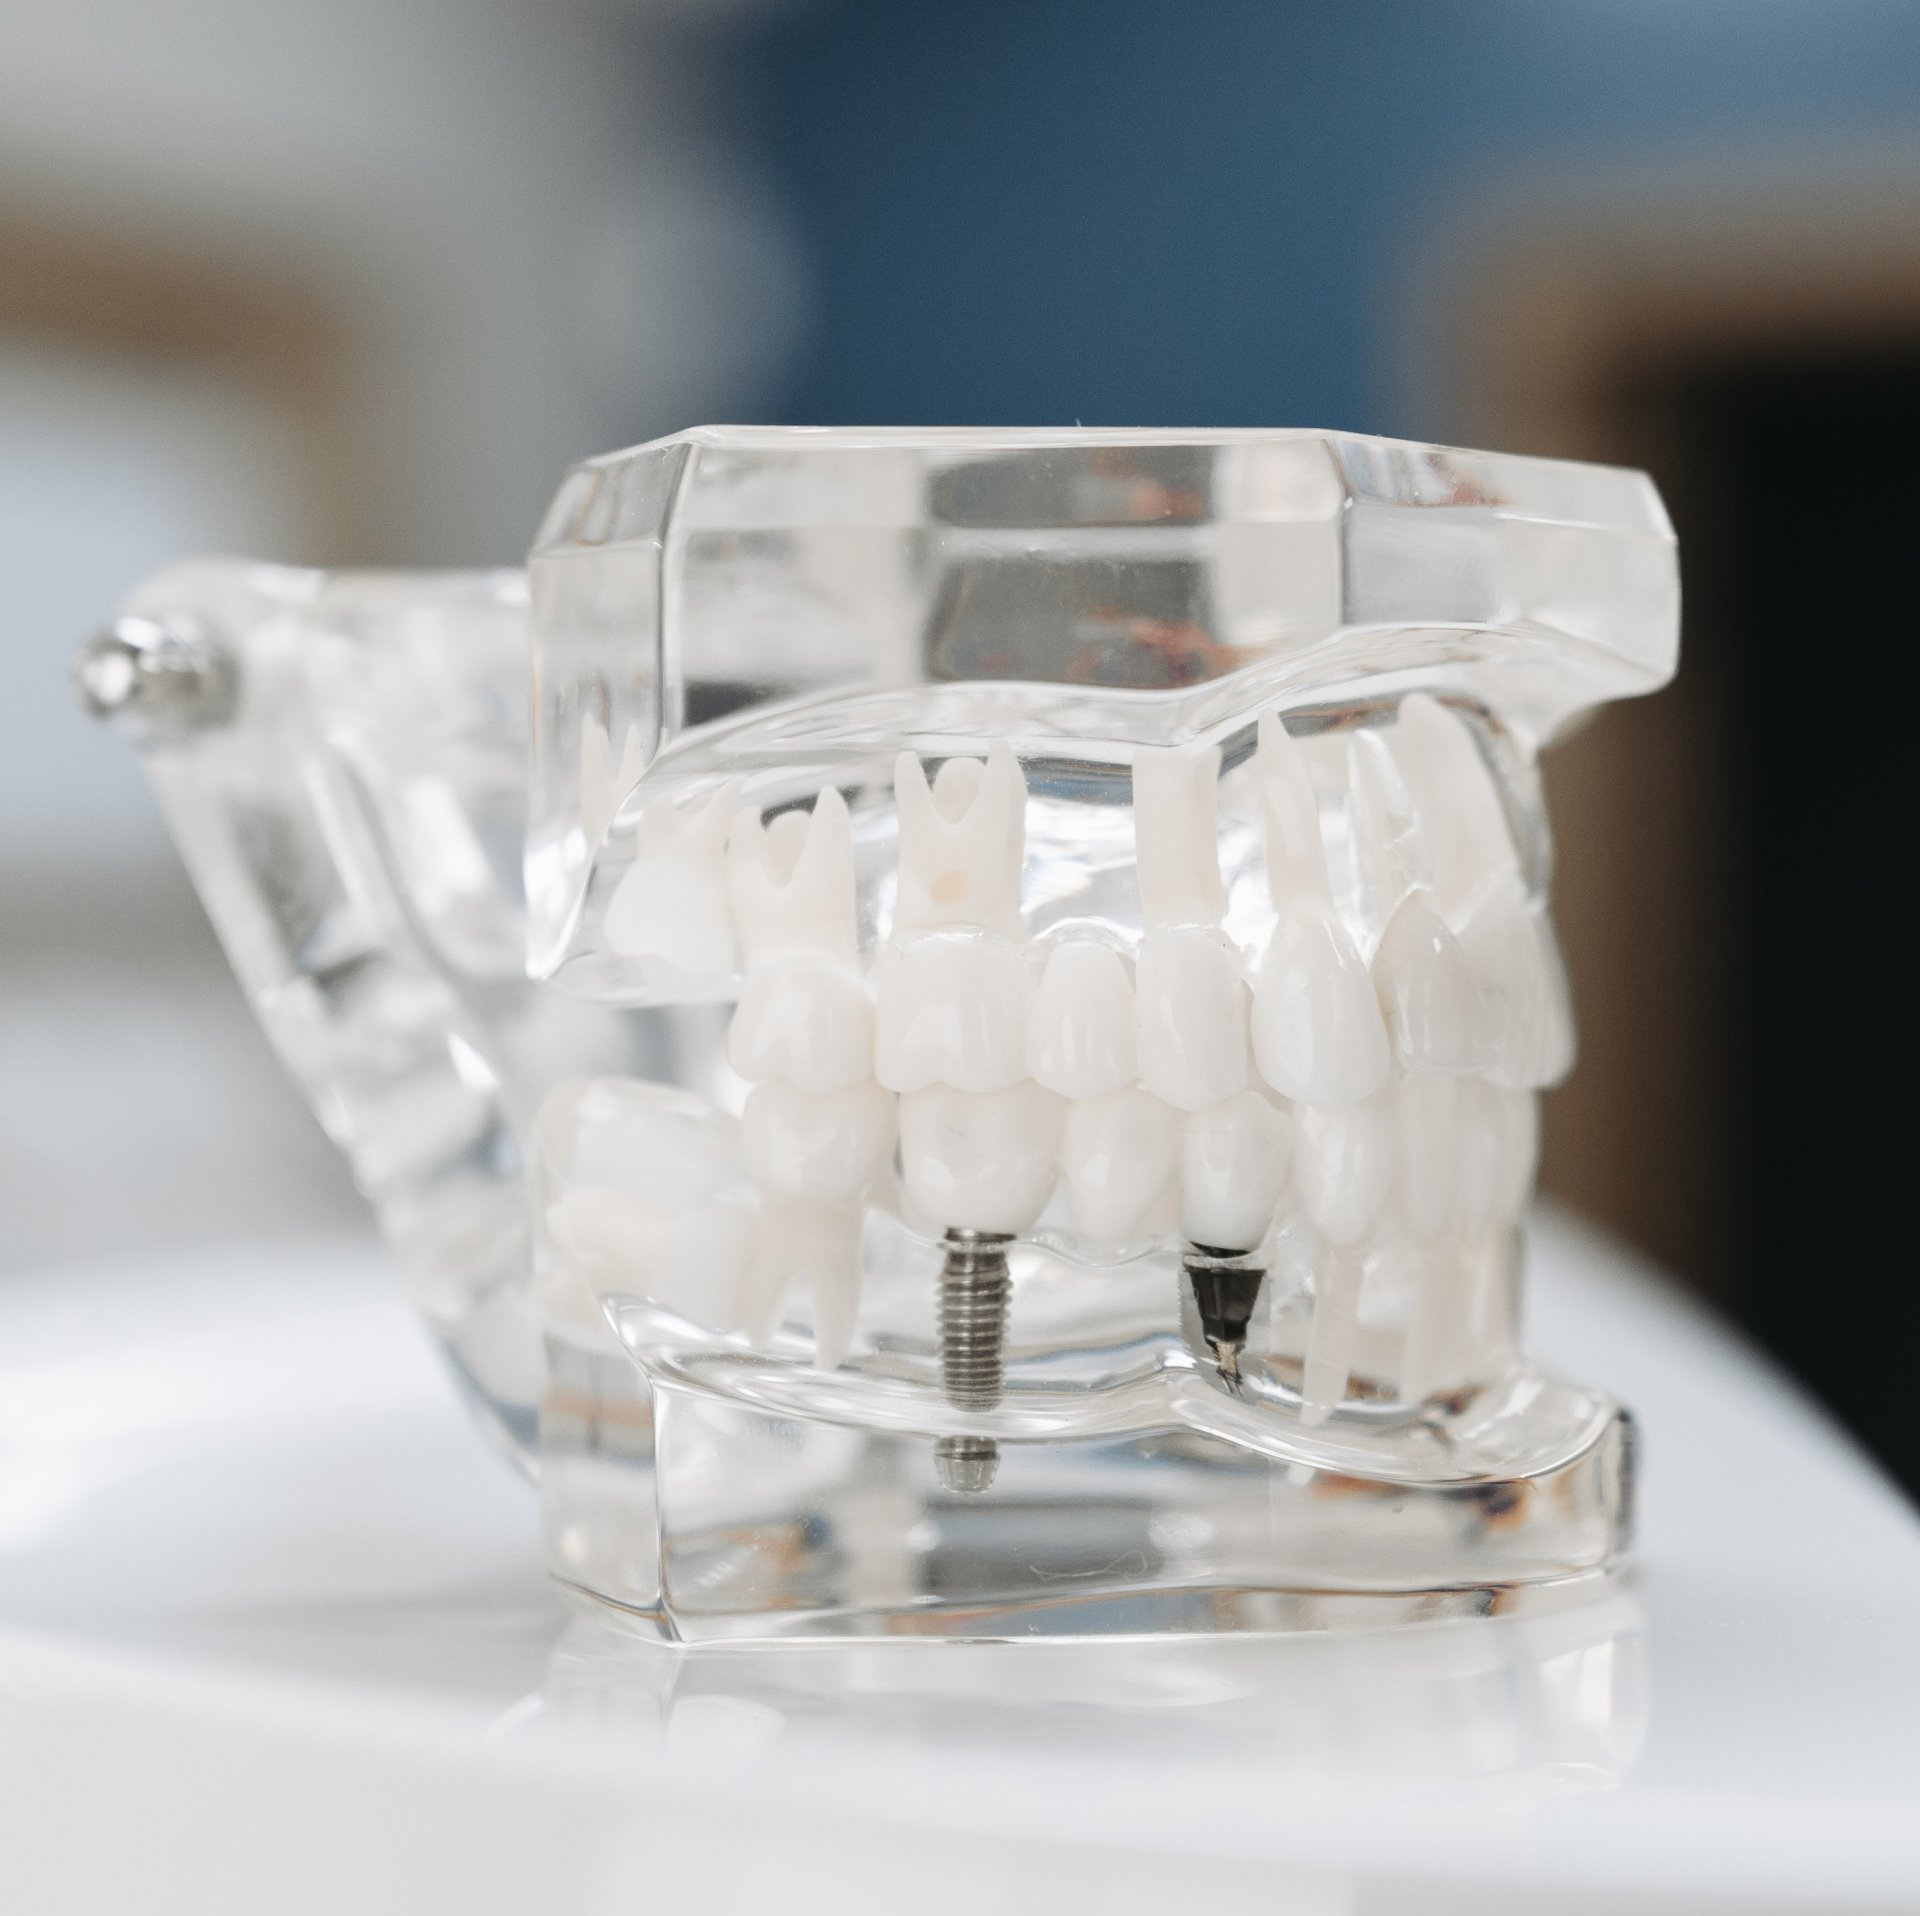 Dental implant at Rand Dental - featured services
